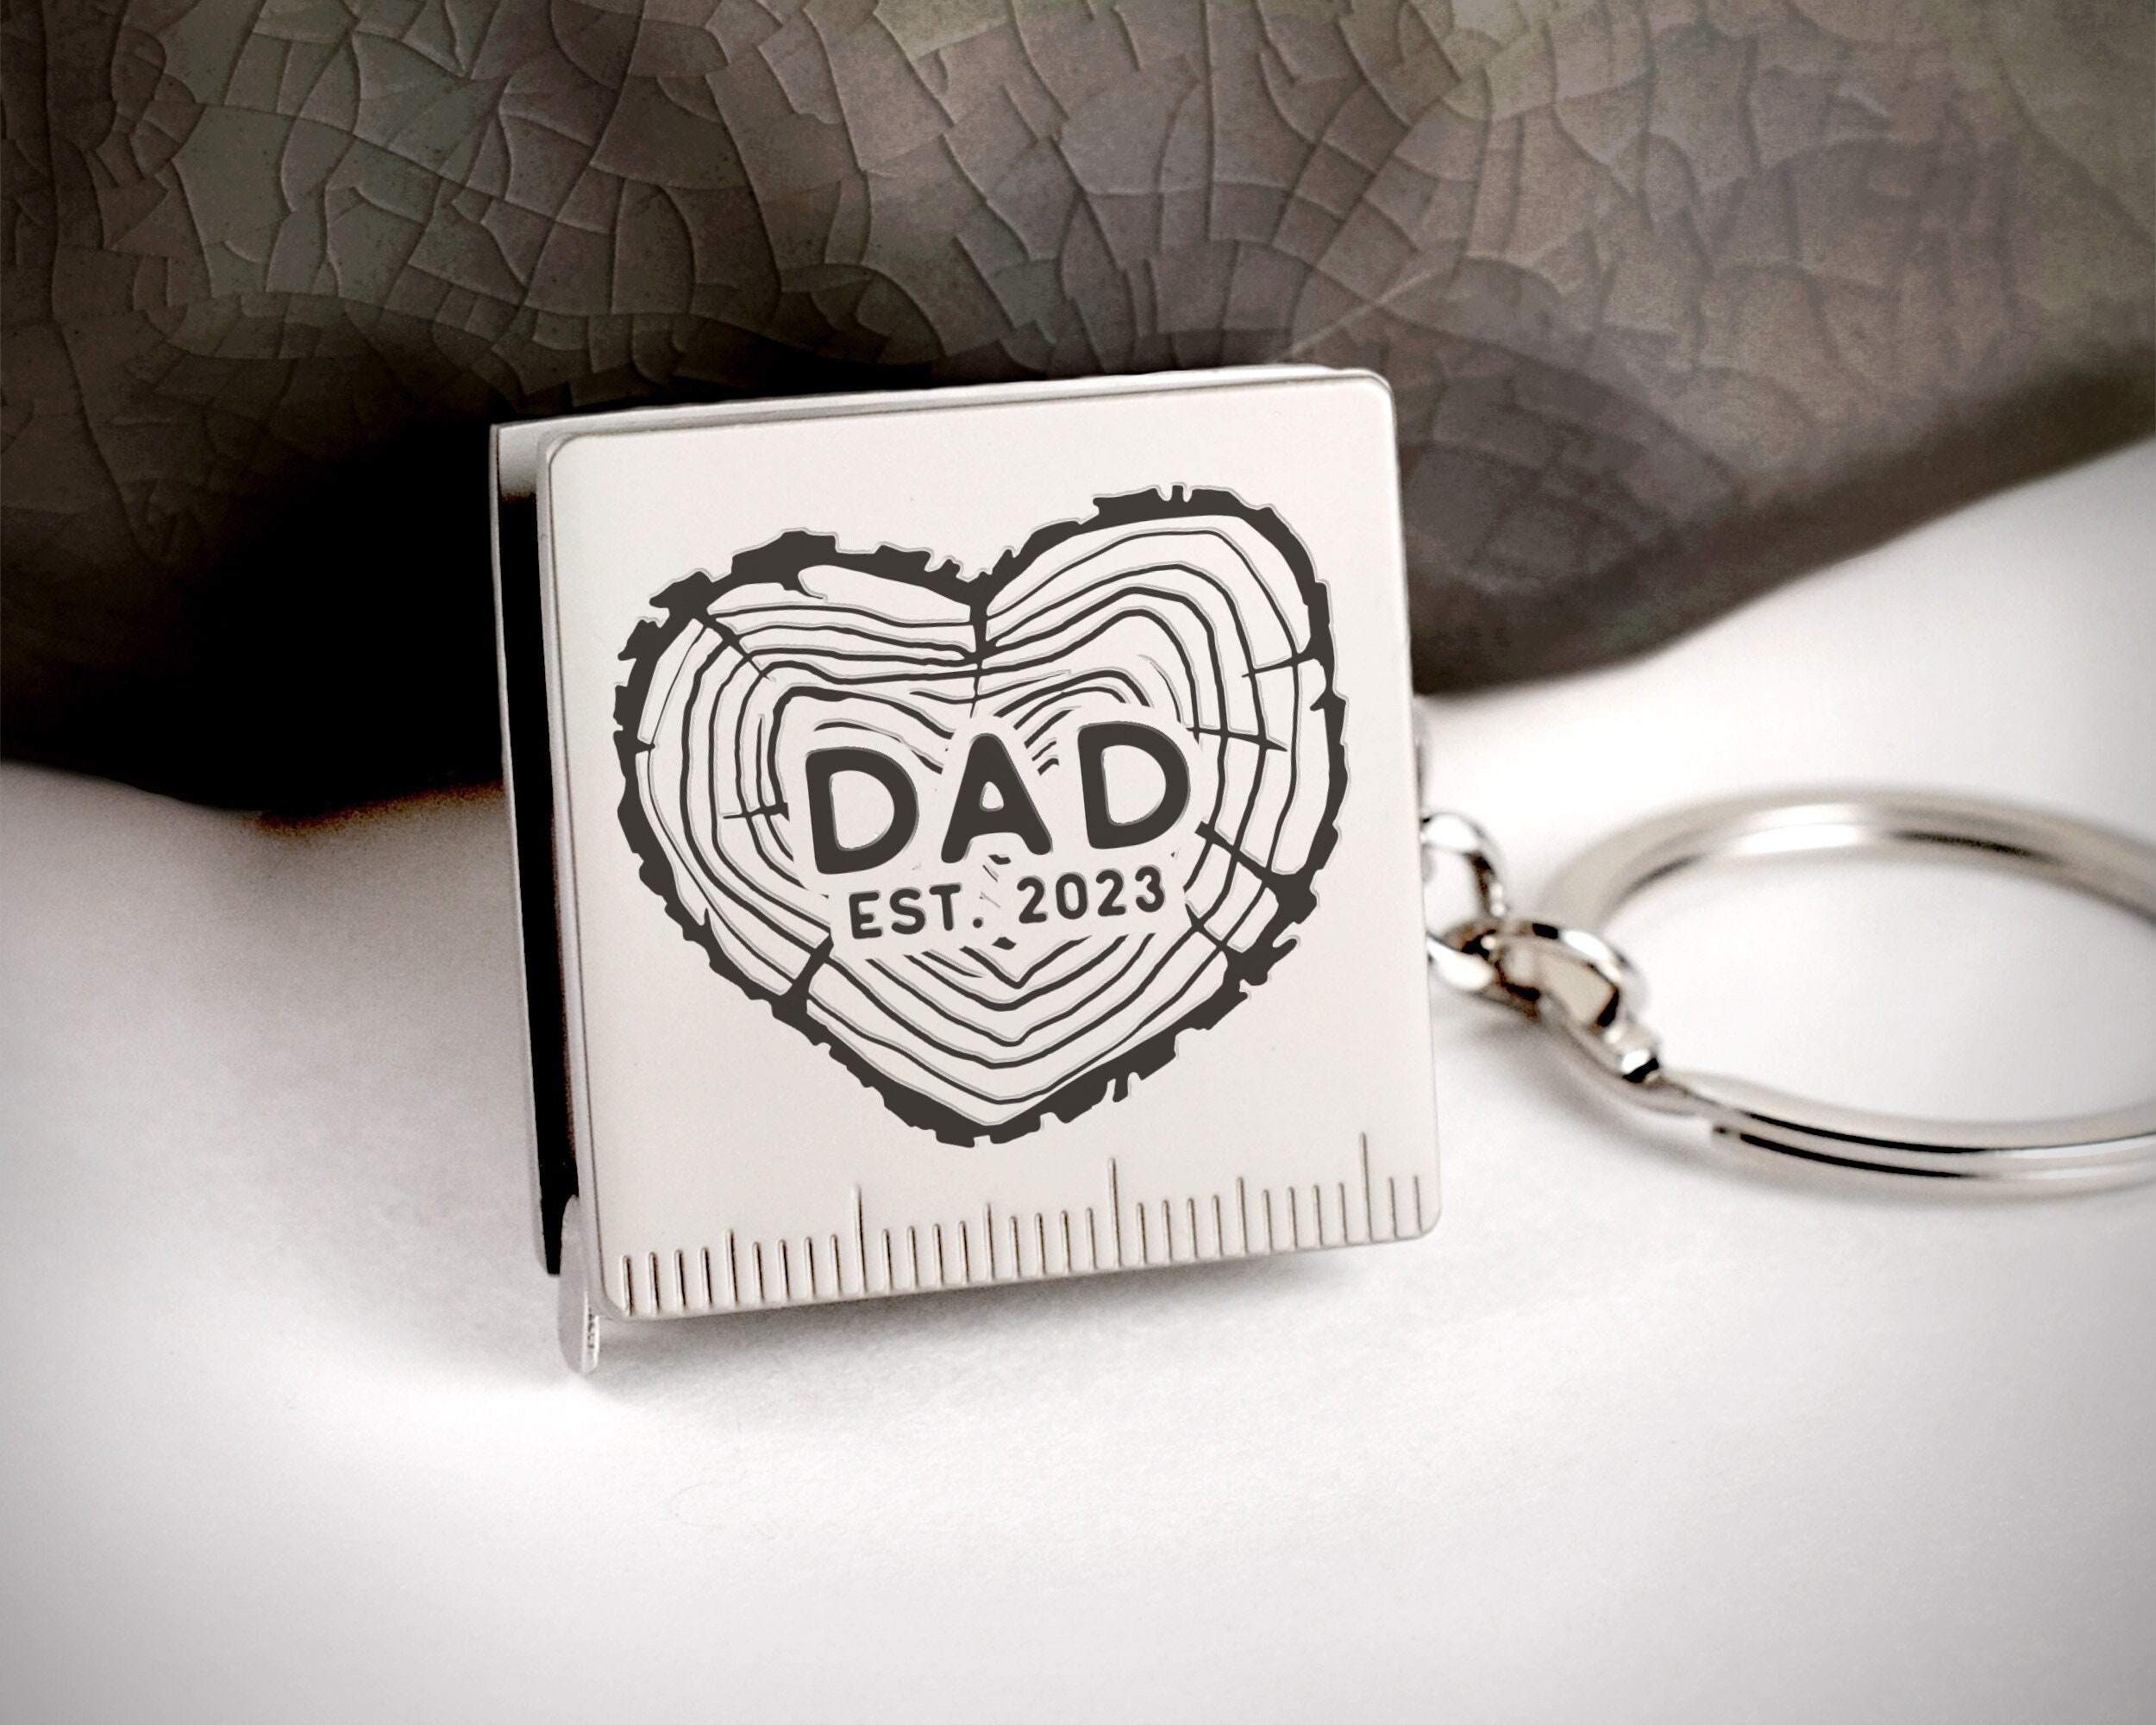 100 Personalized Key Chain / Measuring Tape Favors - Set of 100